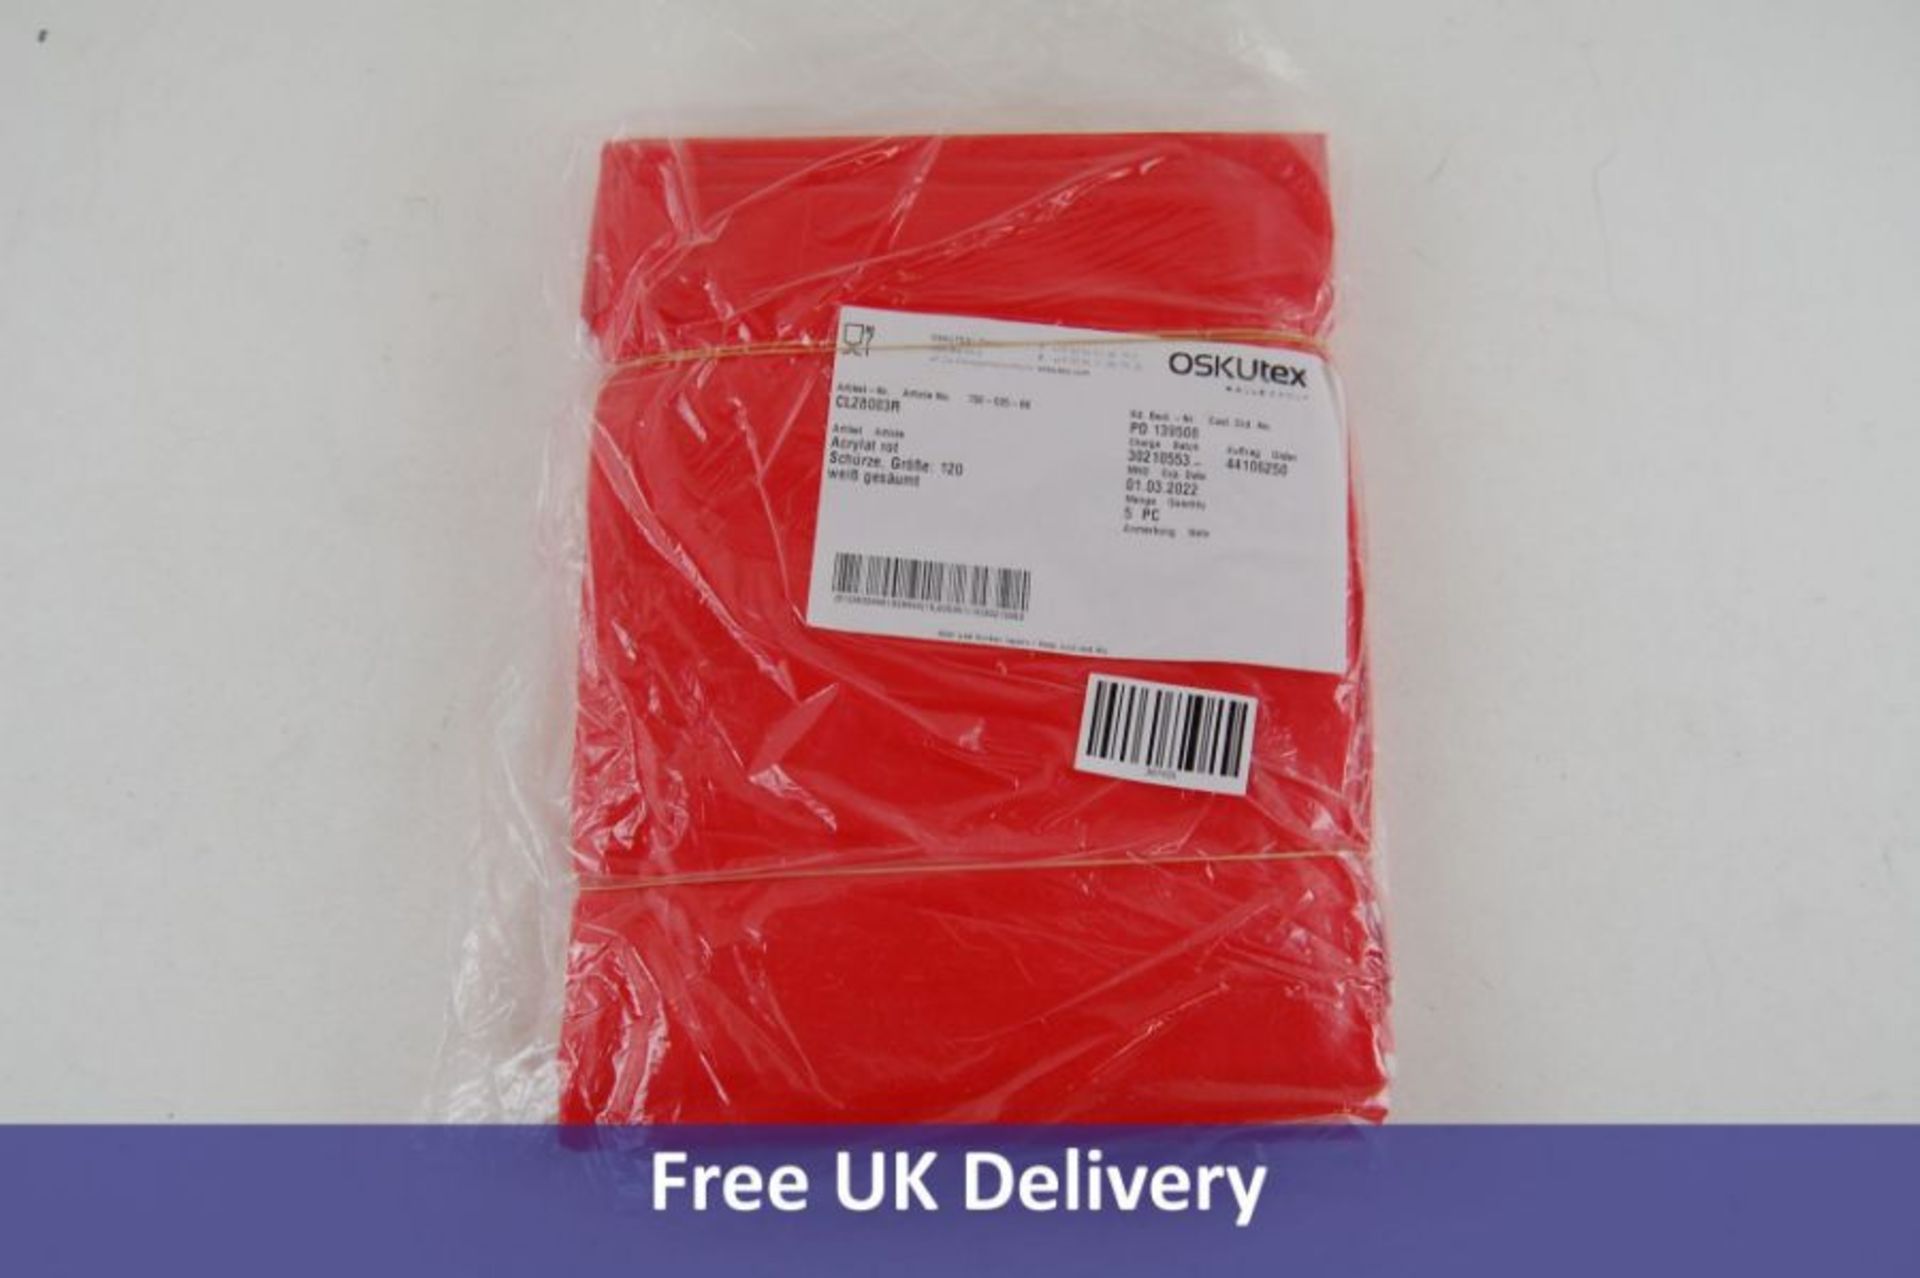 Five Acrylate Red apron size 120 lined with white